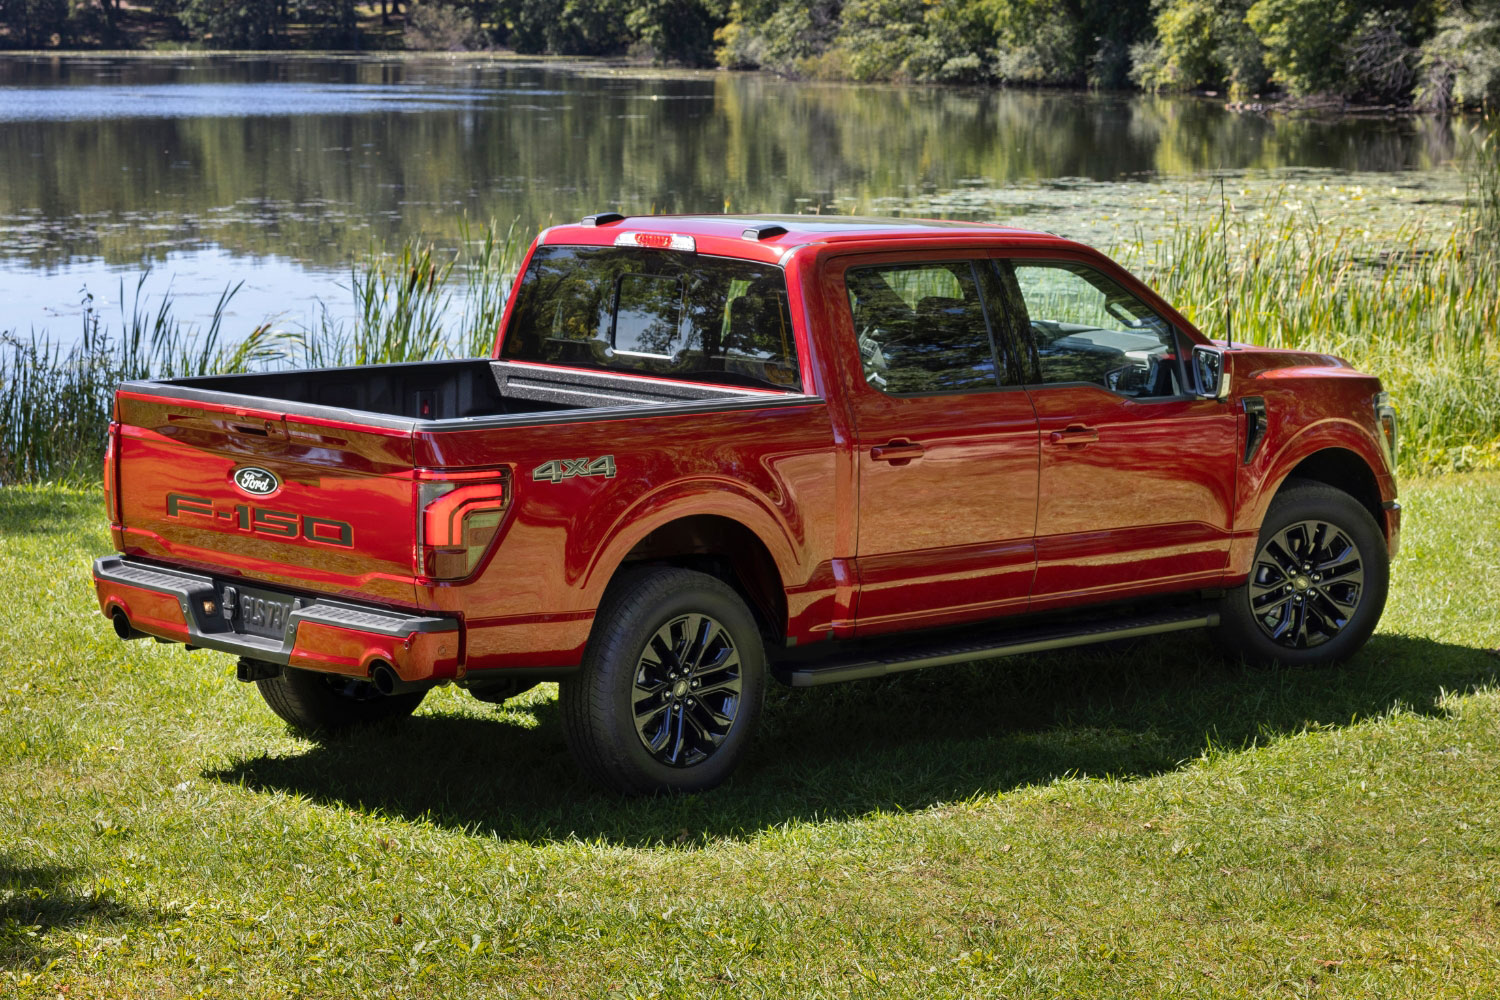 Red 2024 Ford F-150 Lariat parked on grass by a lake.